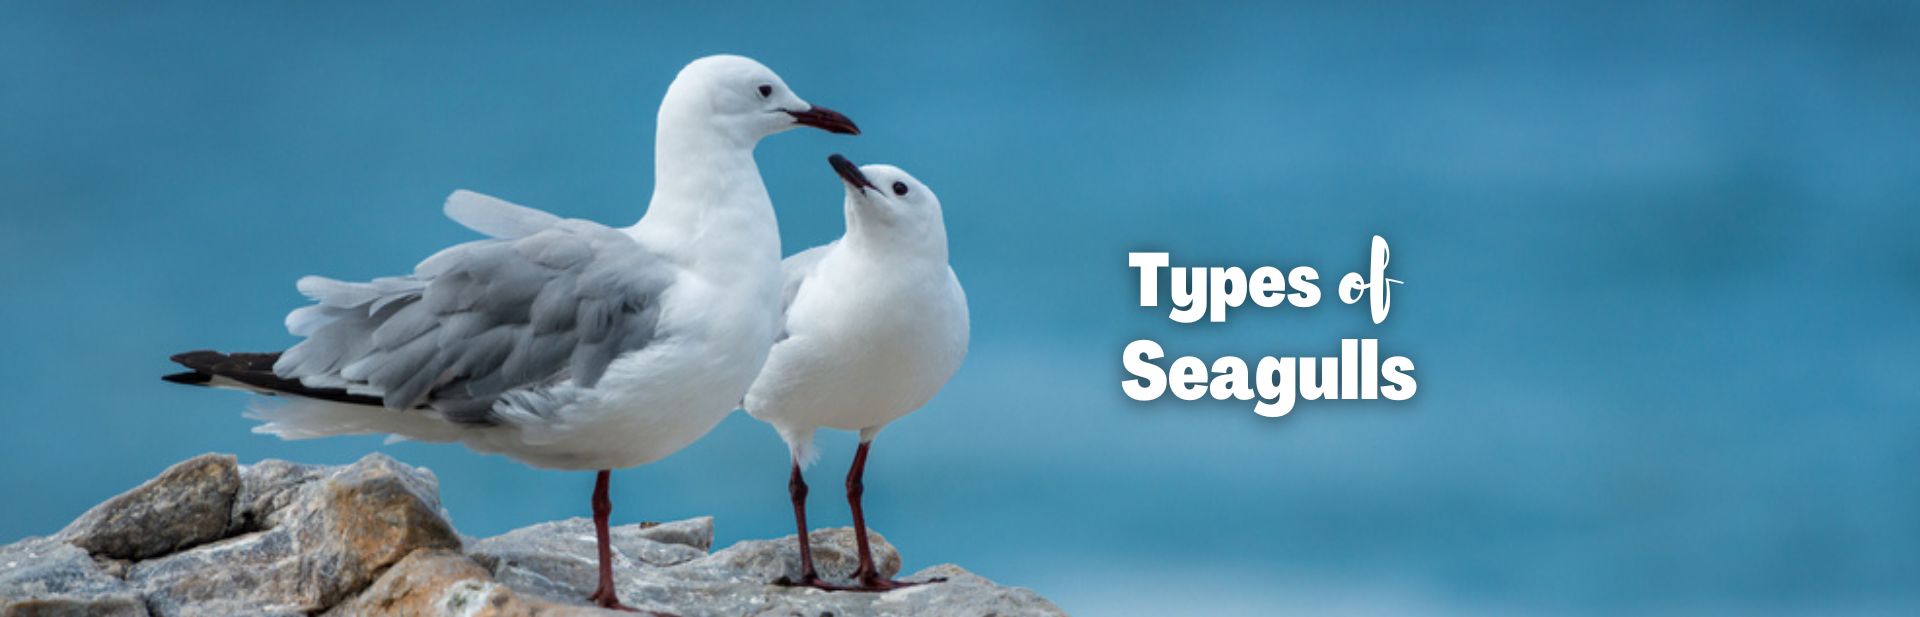 30 Types of Seagulls: Exploring the Amazing Variety of These Seafaring Birds